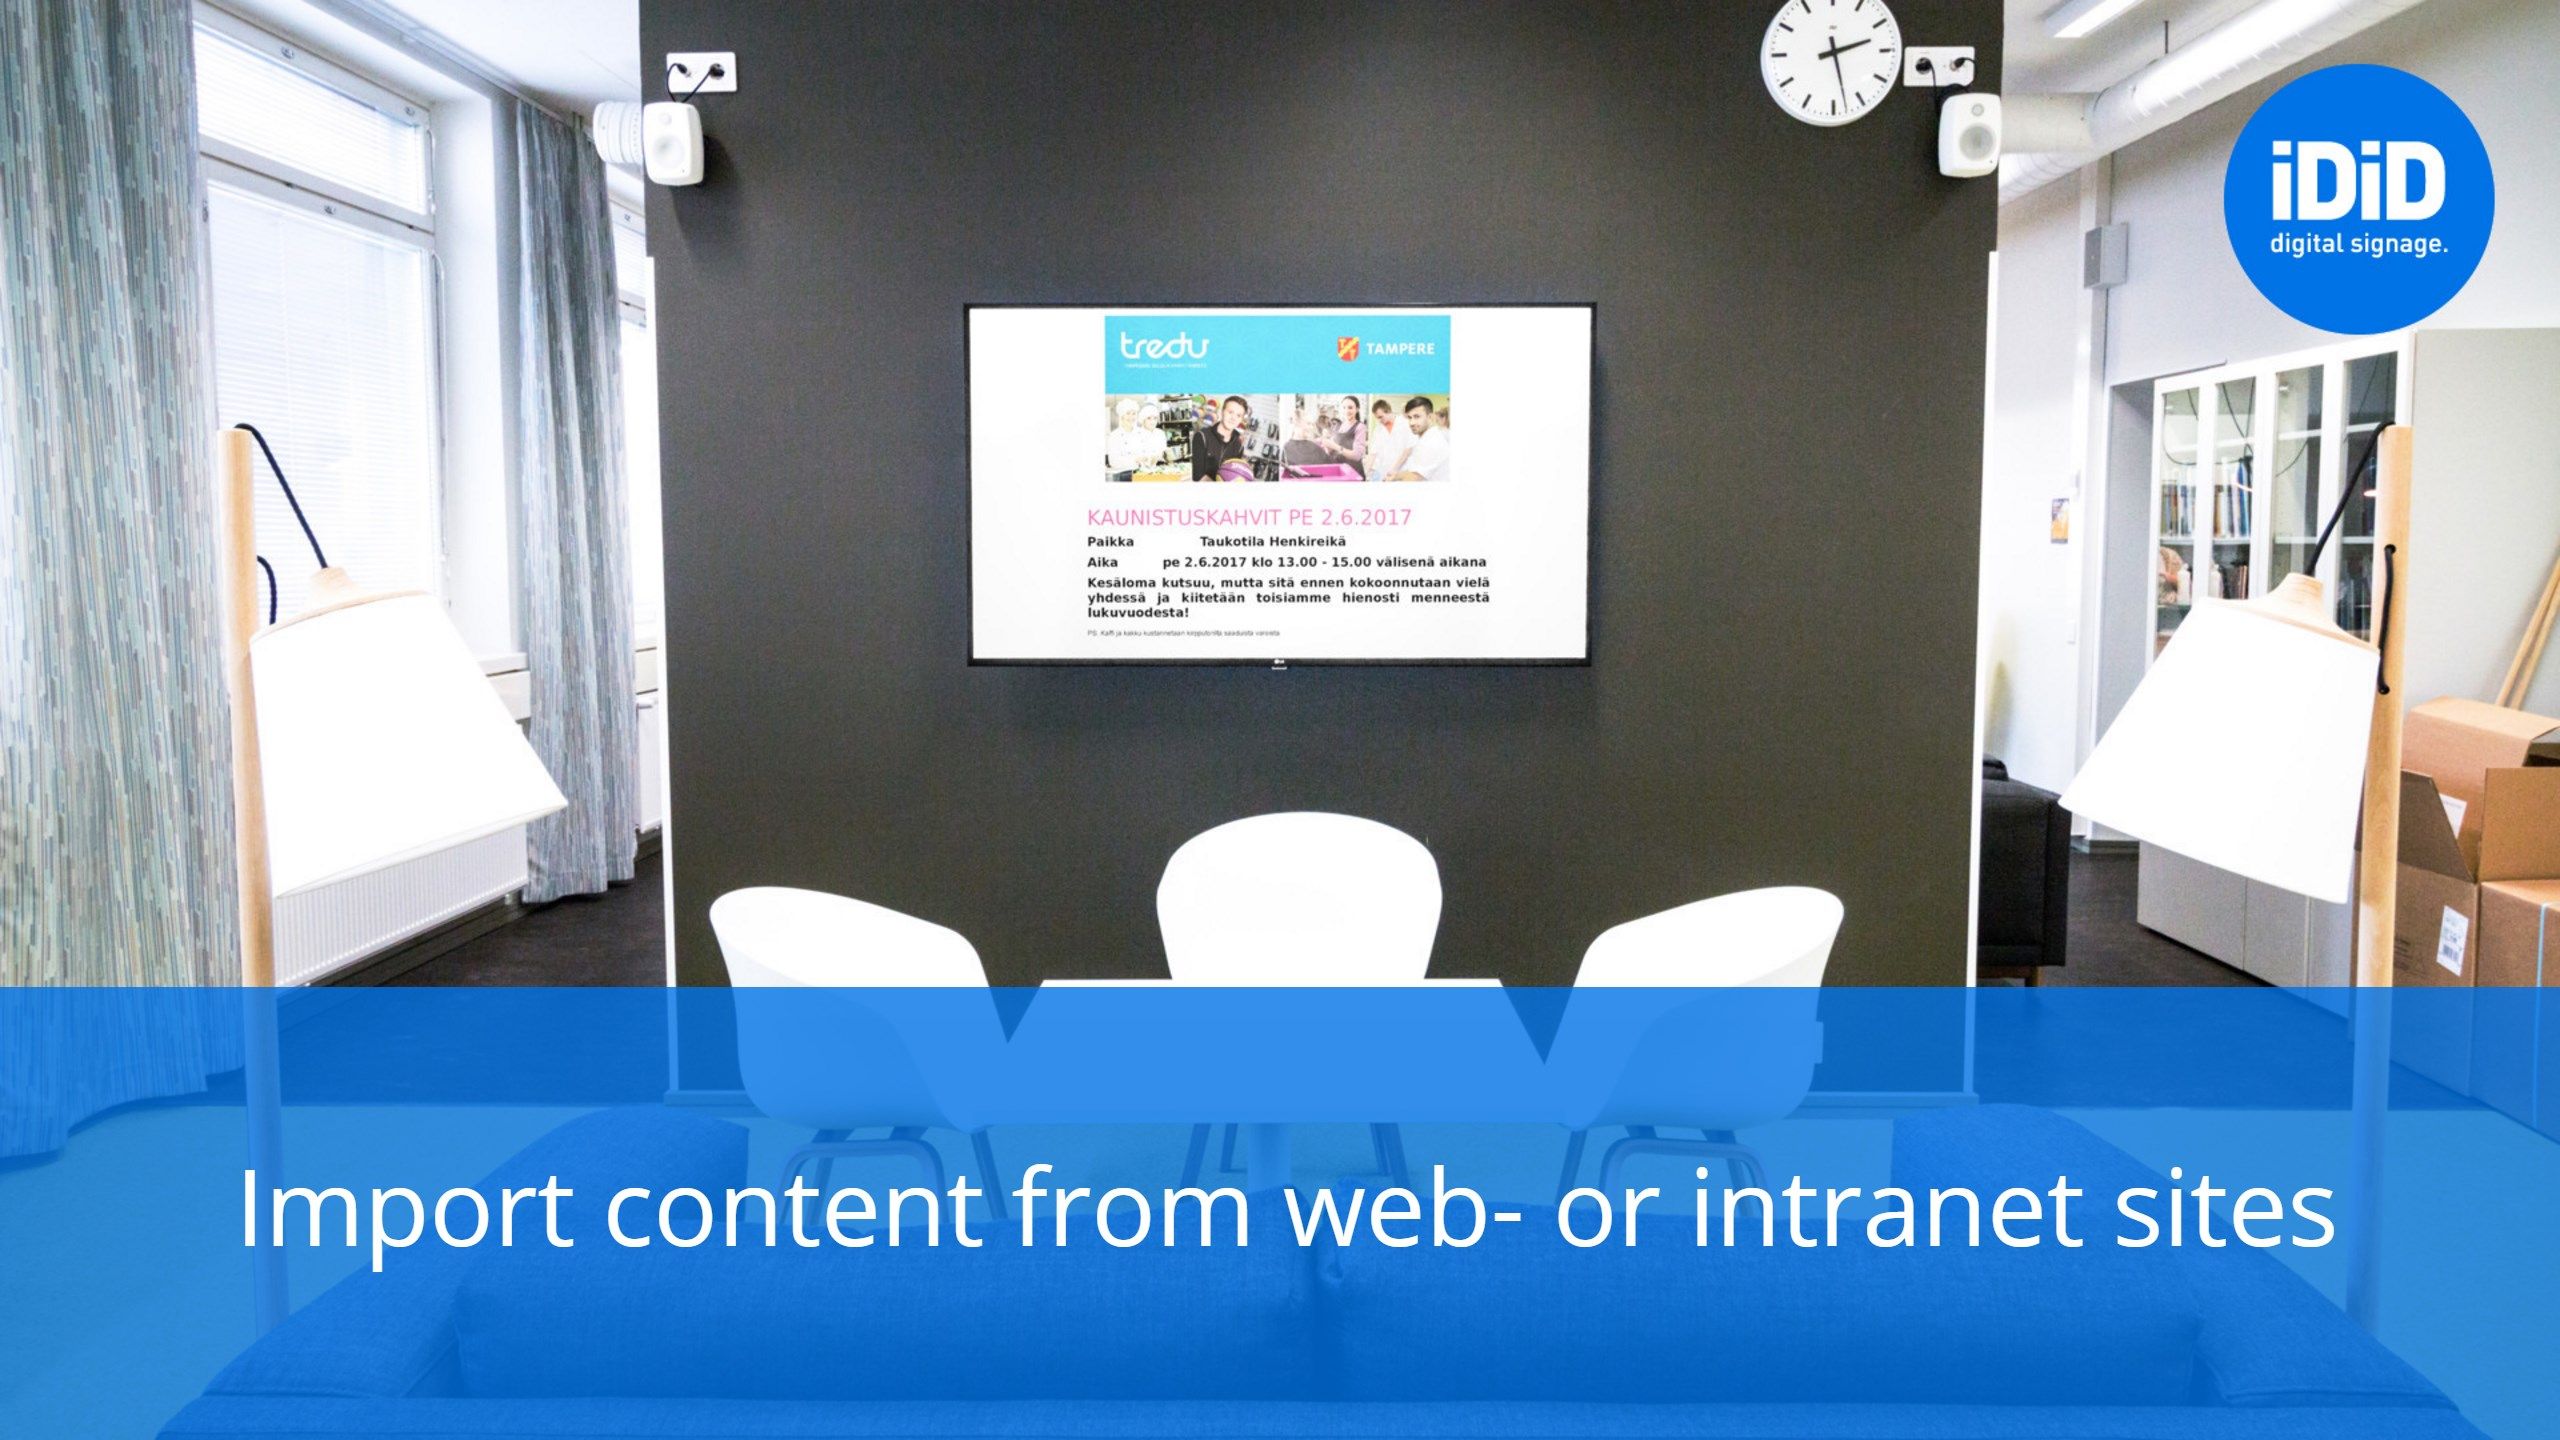 Get content from internet- or intranet sites.